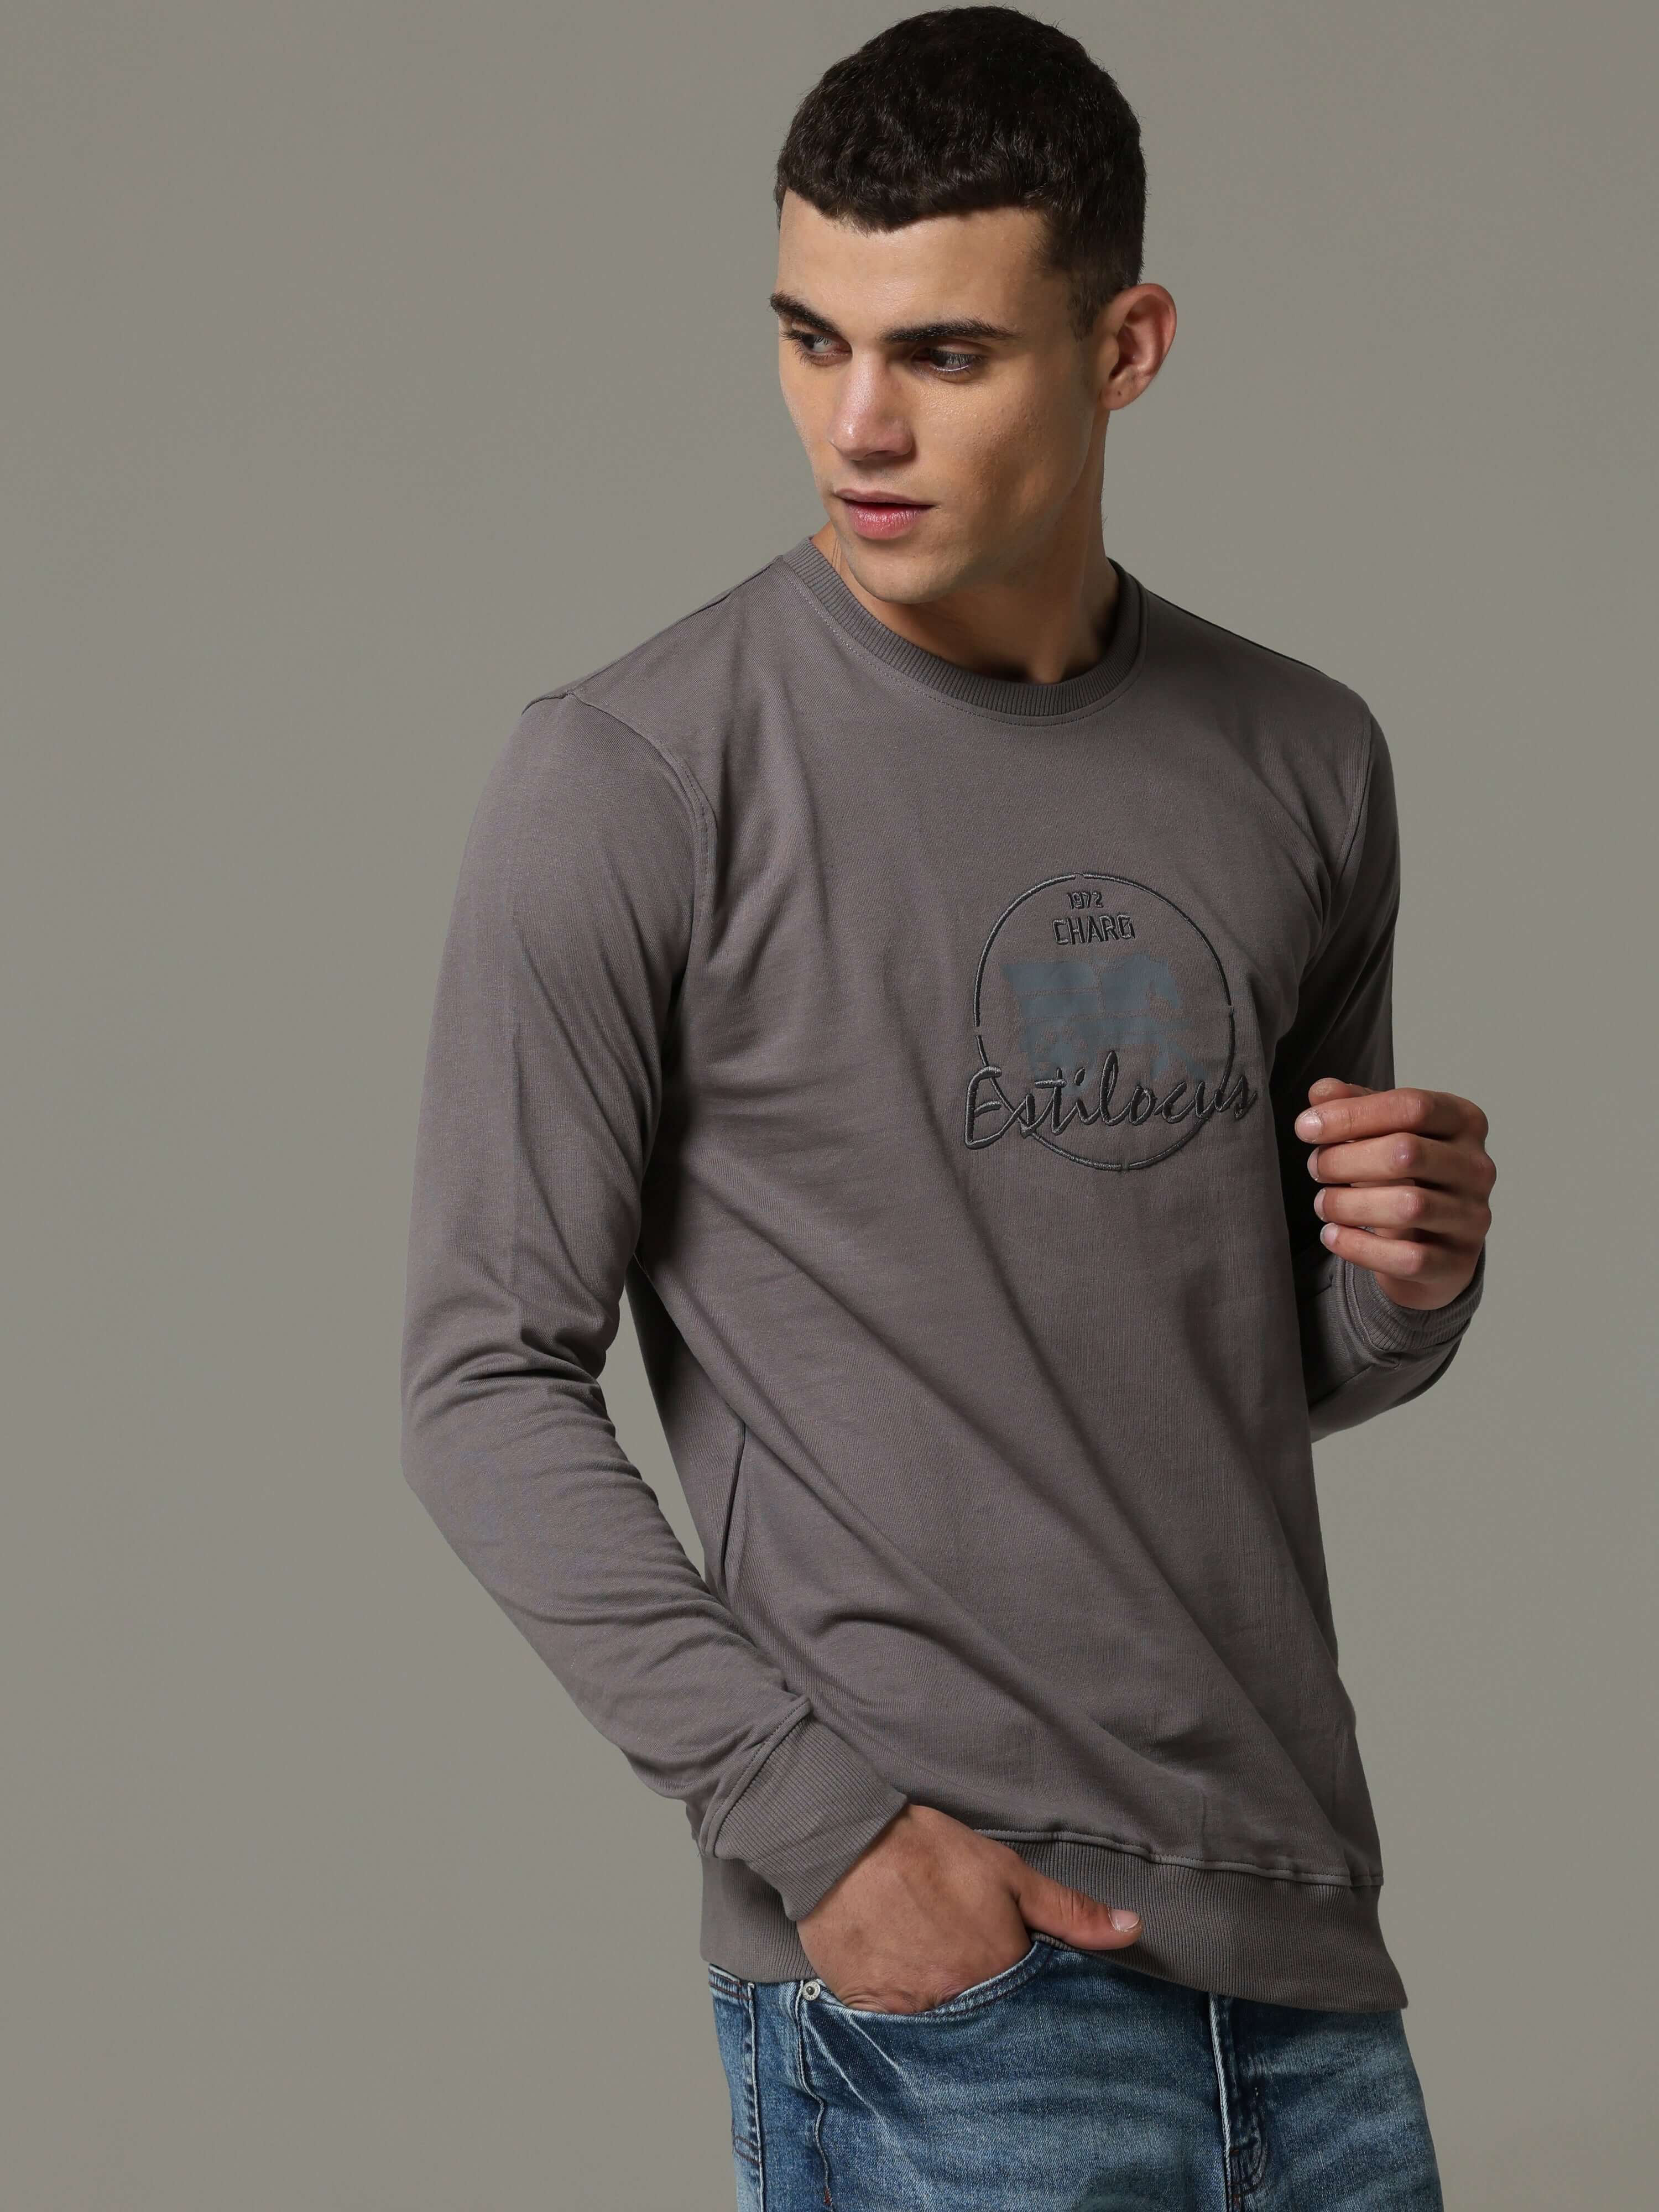 Invisible Steel Grey Sweat Shirt shop online at Estilocus. • Crew neck • Long sleeve • Ribbing around neckline, Cuff & hem • High quality print and fine embroidery Fit : Comfort fit Size : The model is wearing M size Model height : 6 Feet Wash care : Cold